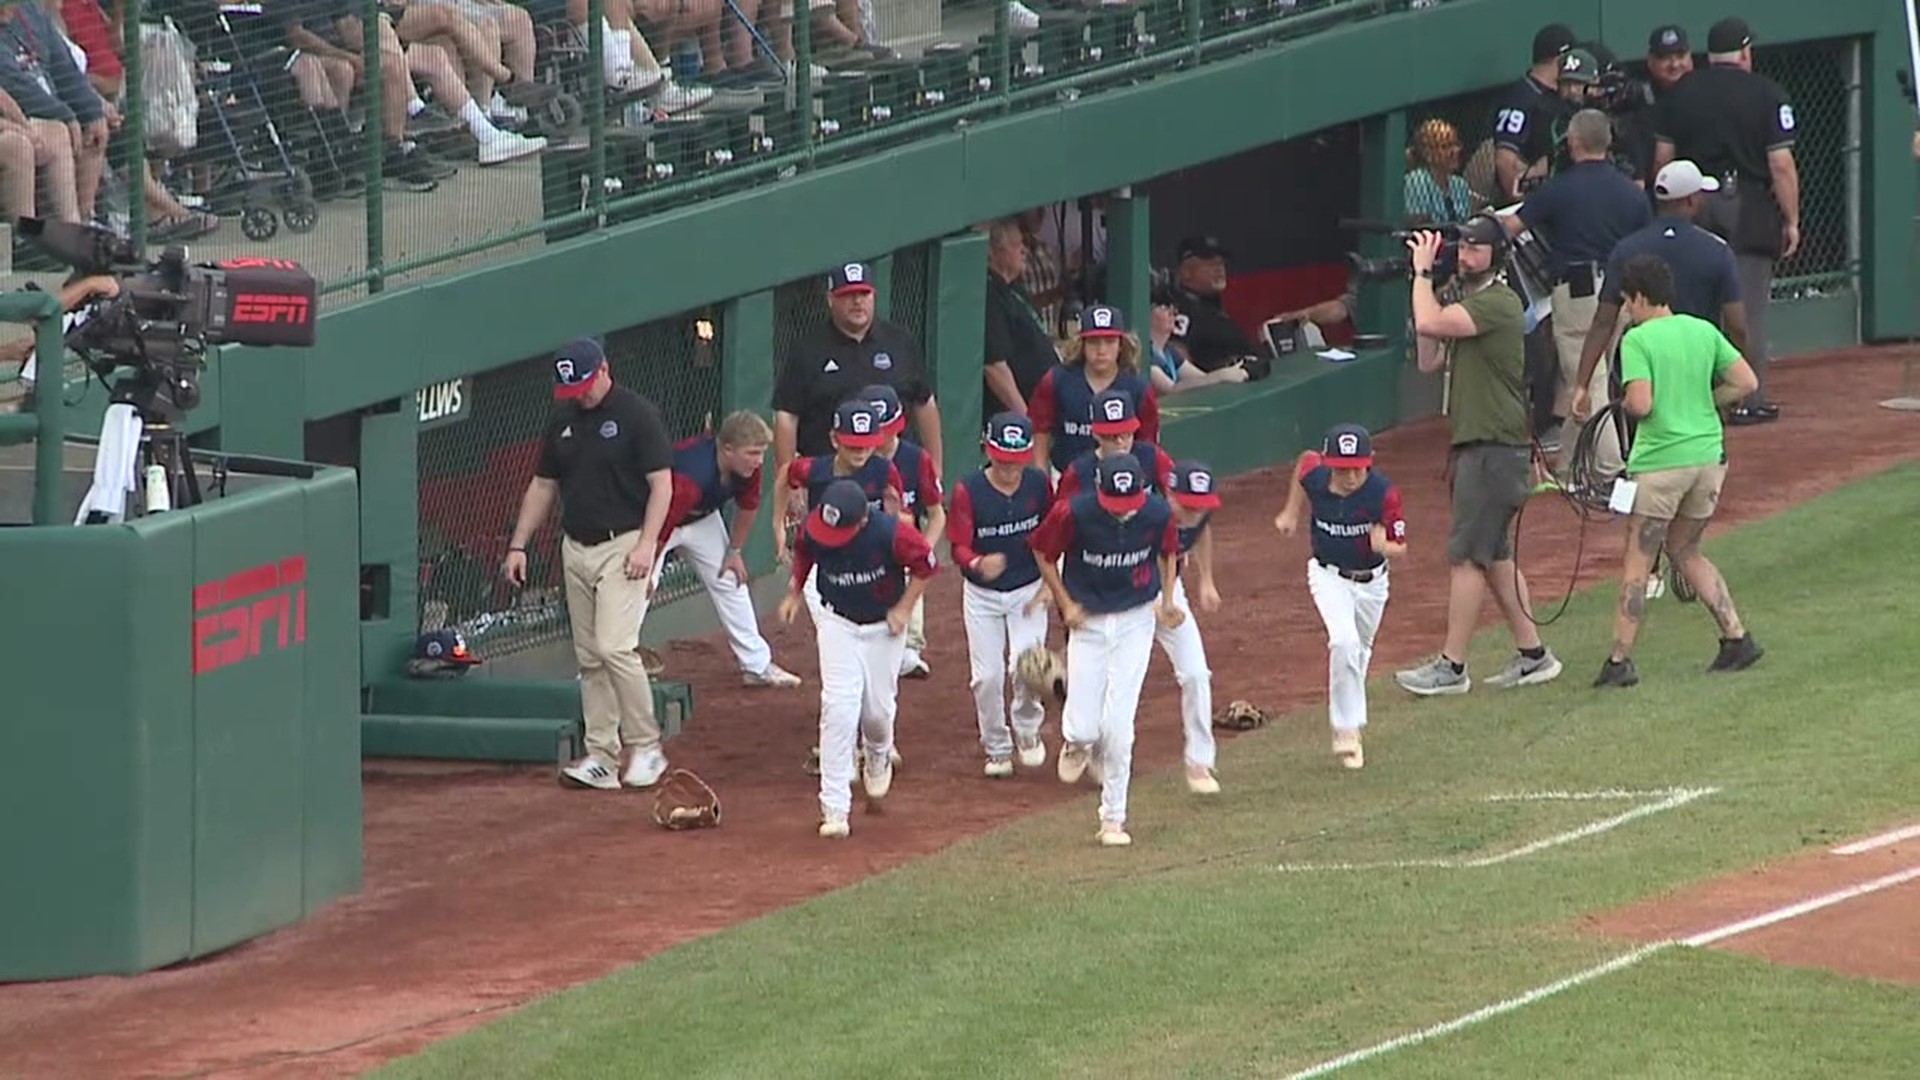 One week later, the same two teams are matching up in the LLWS. But this time, Pennsylvania fans hope for a different result.